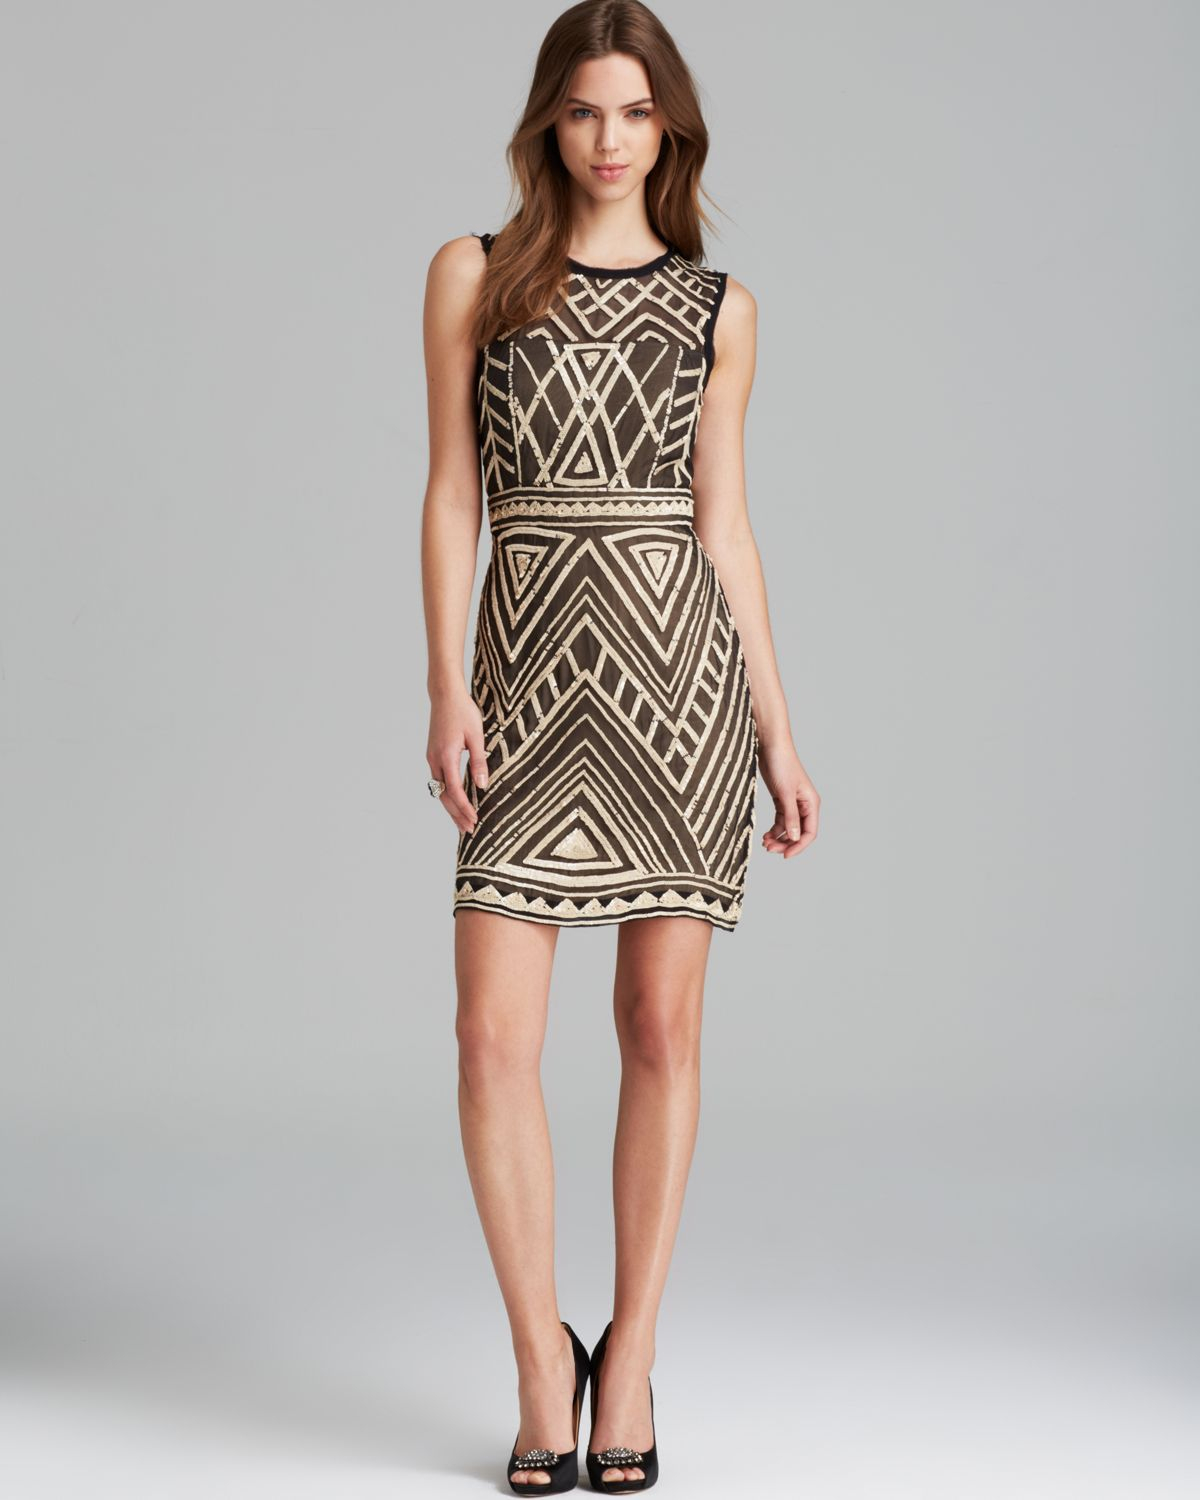 Nicole miller Dress Sleeveless Sequin Illusion in Natural - Lyst